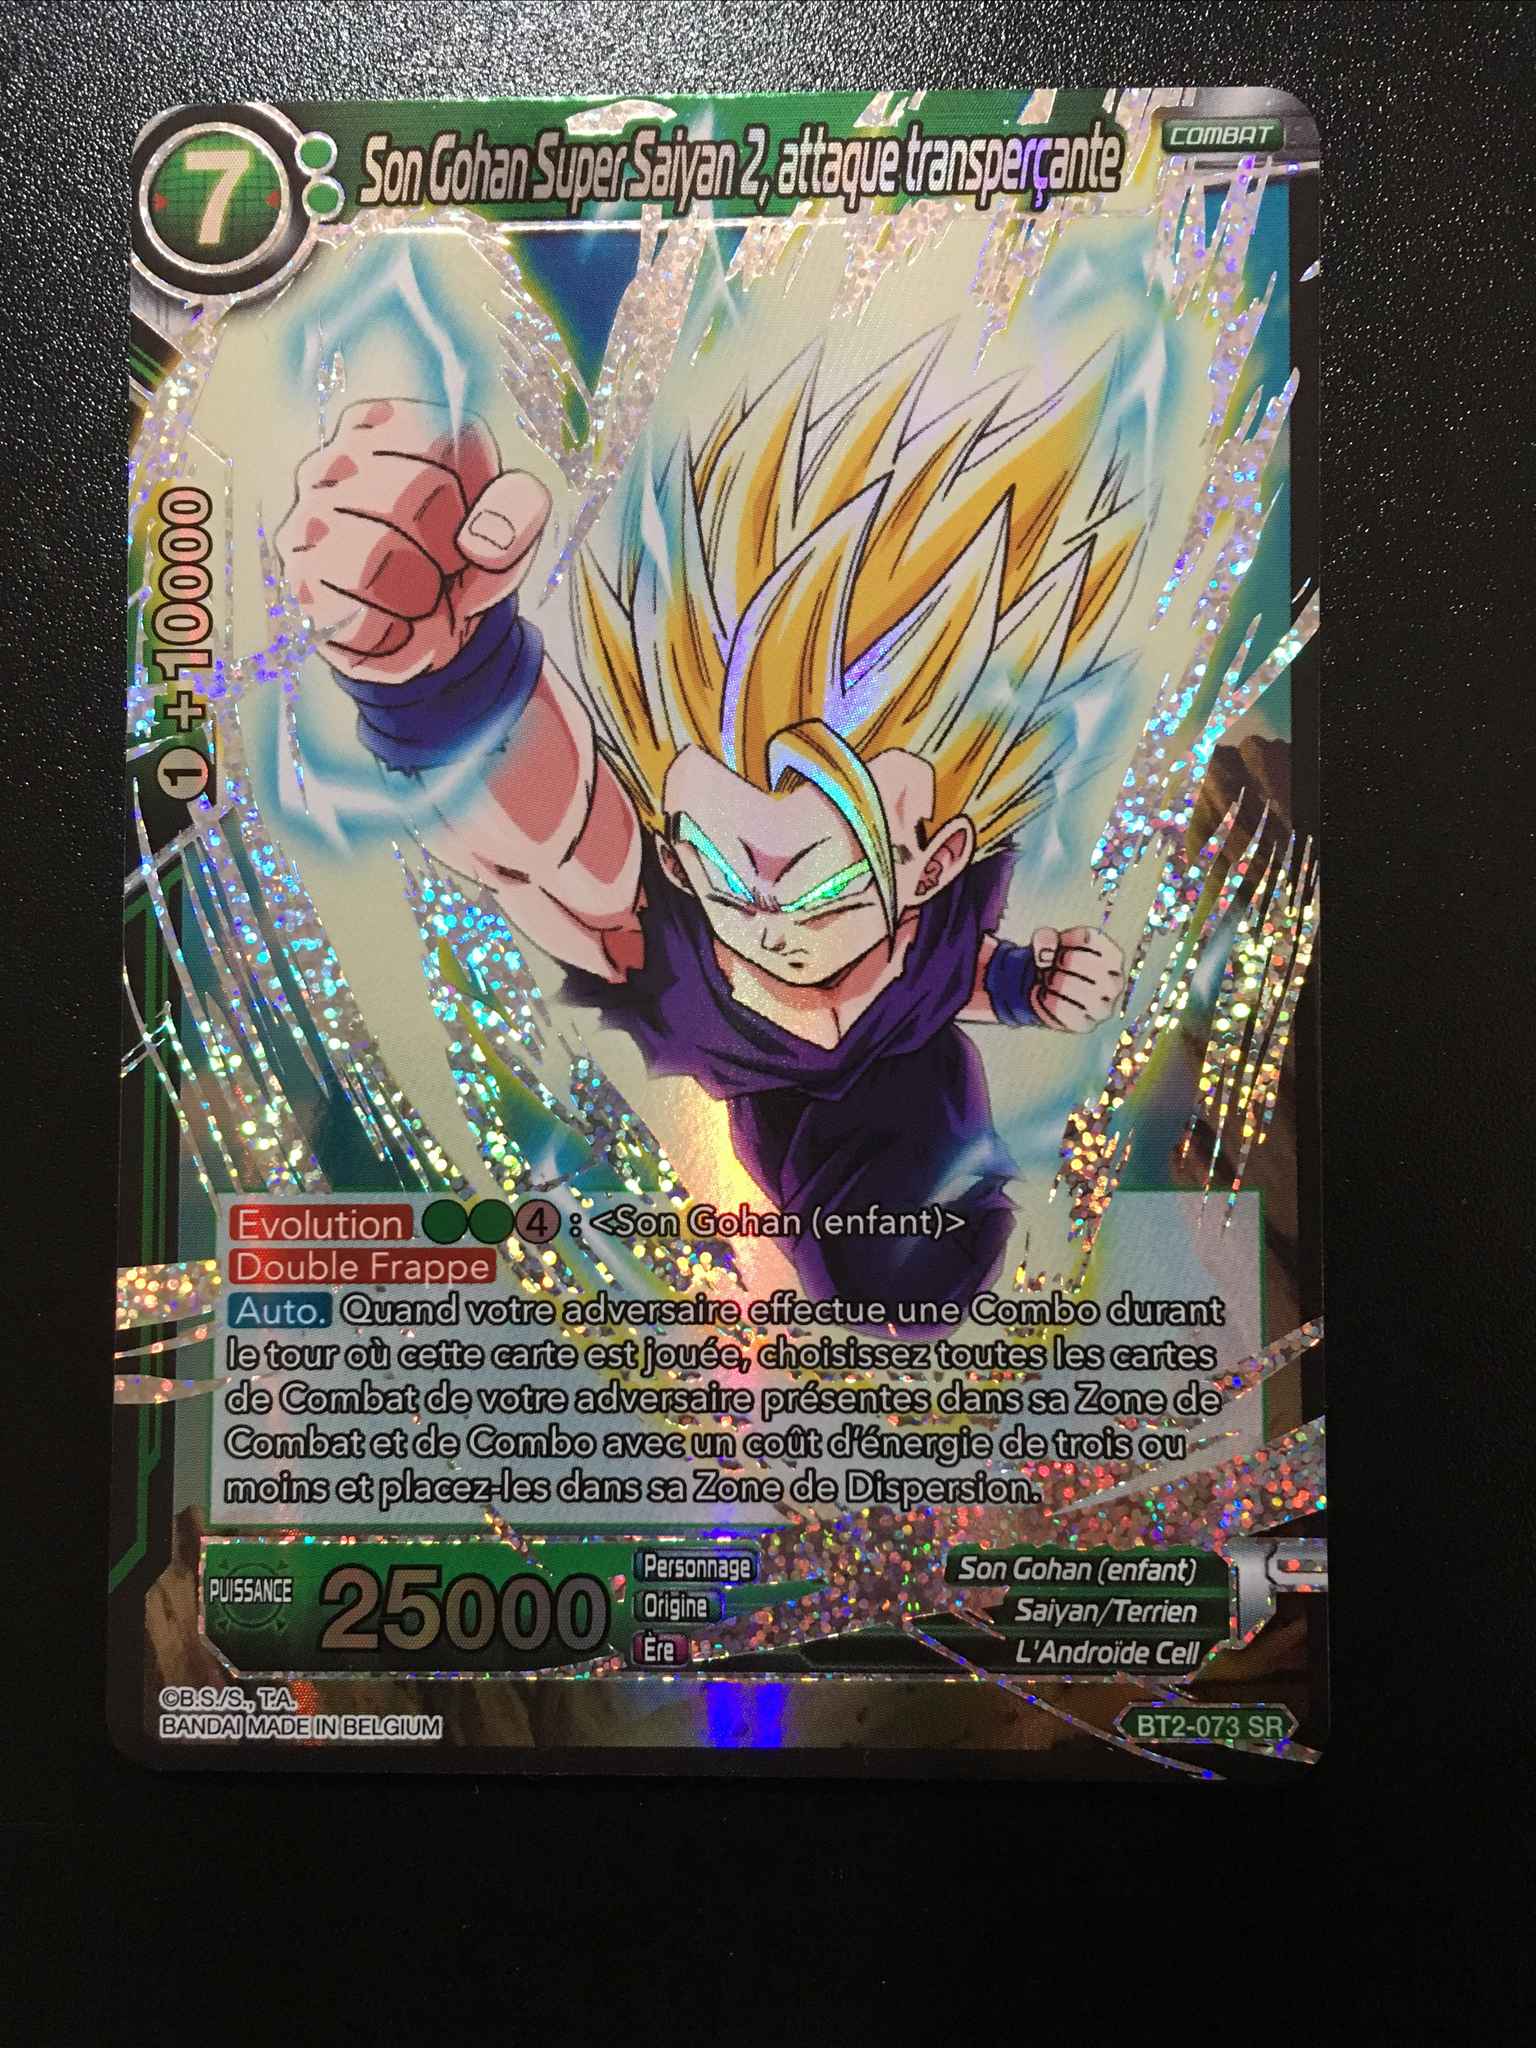 Japanese Anime Collectables Dragon Ball Super Card Game Piercing Super Saiyan 2 Son Gohan Sr Bt2 073 Collectables Sloopy In